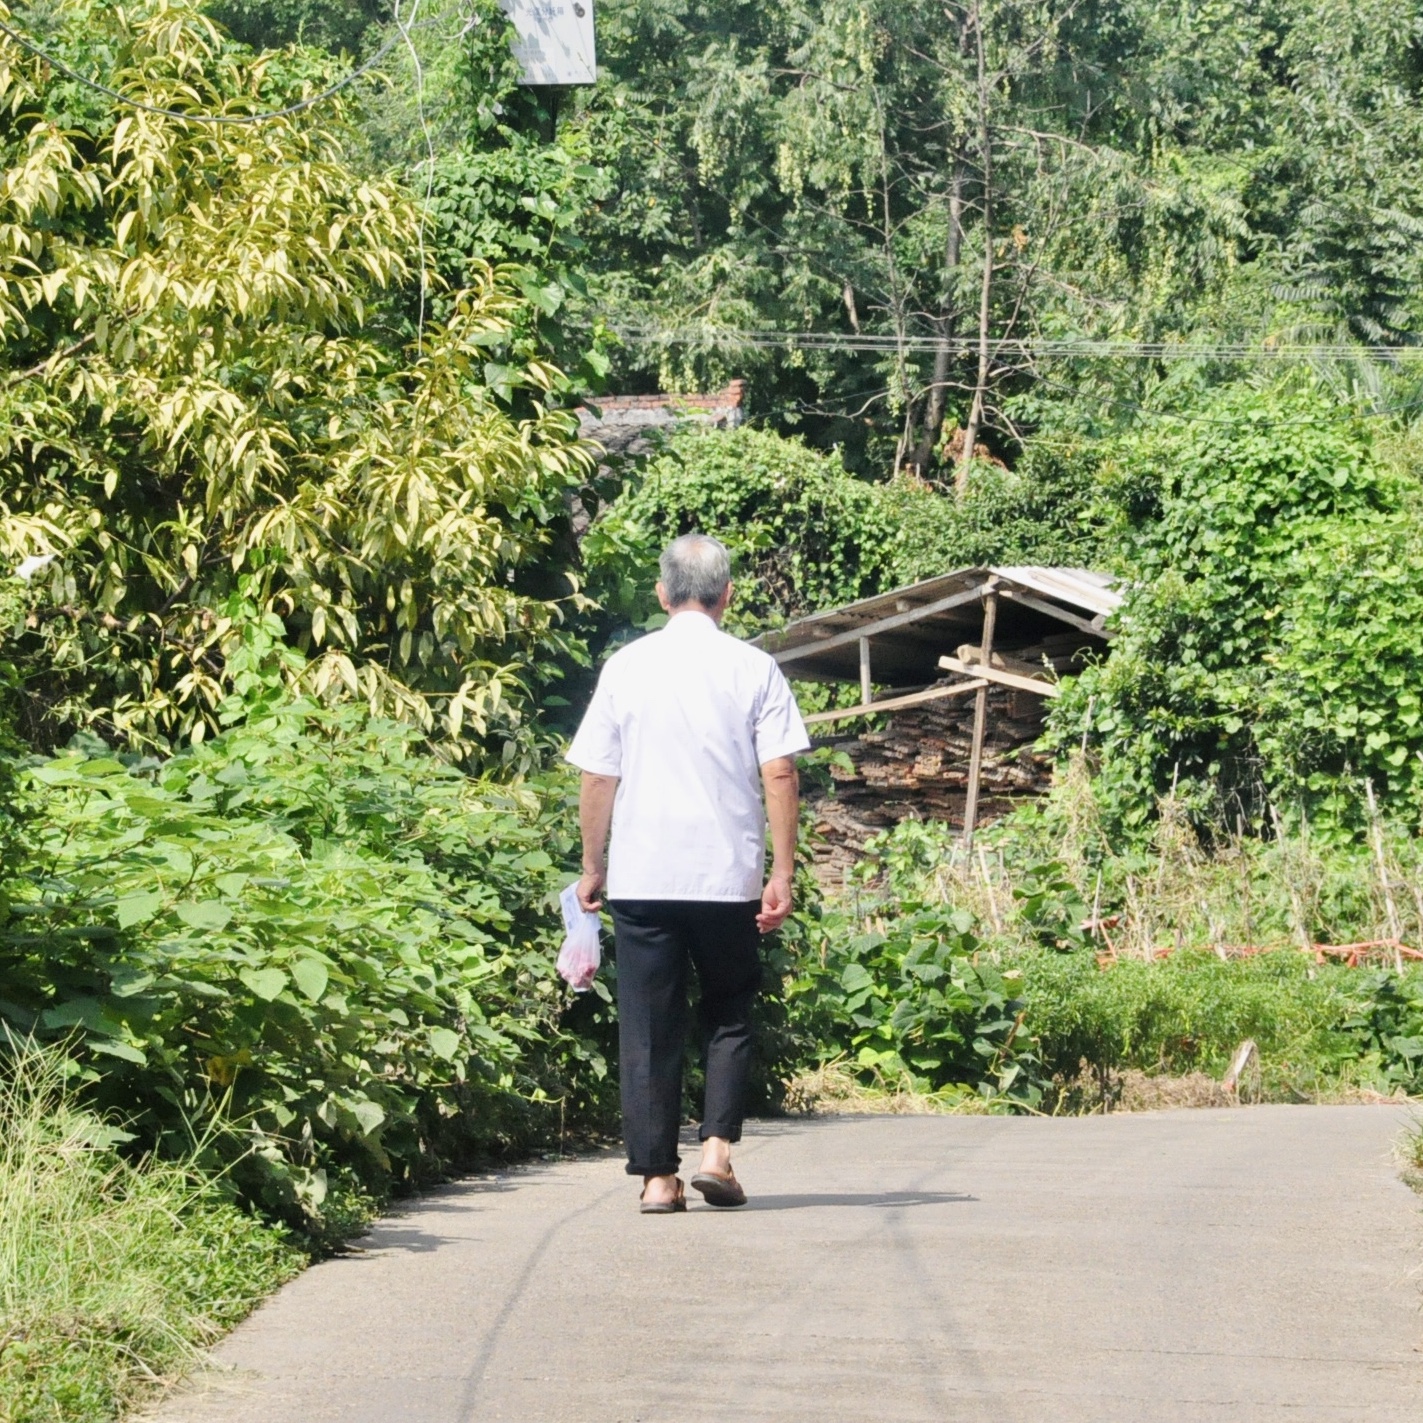 With a small plastic bag in his hand, an old man wearing white shirt and black pants is walking on a cement path surrounded by trees and shrubberies on a sunlit day.